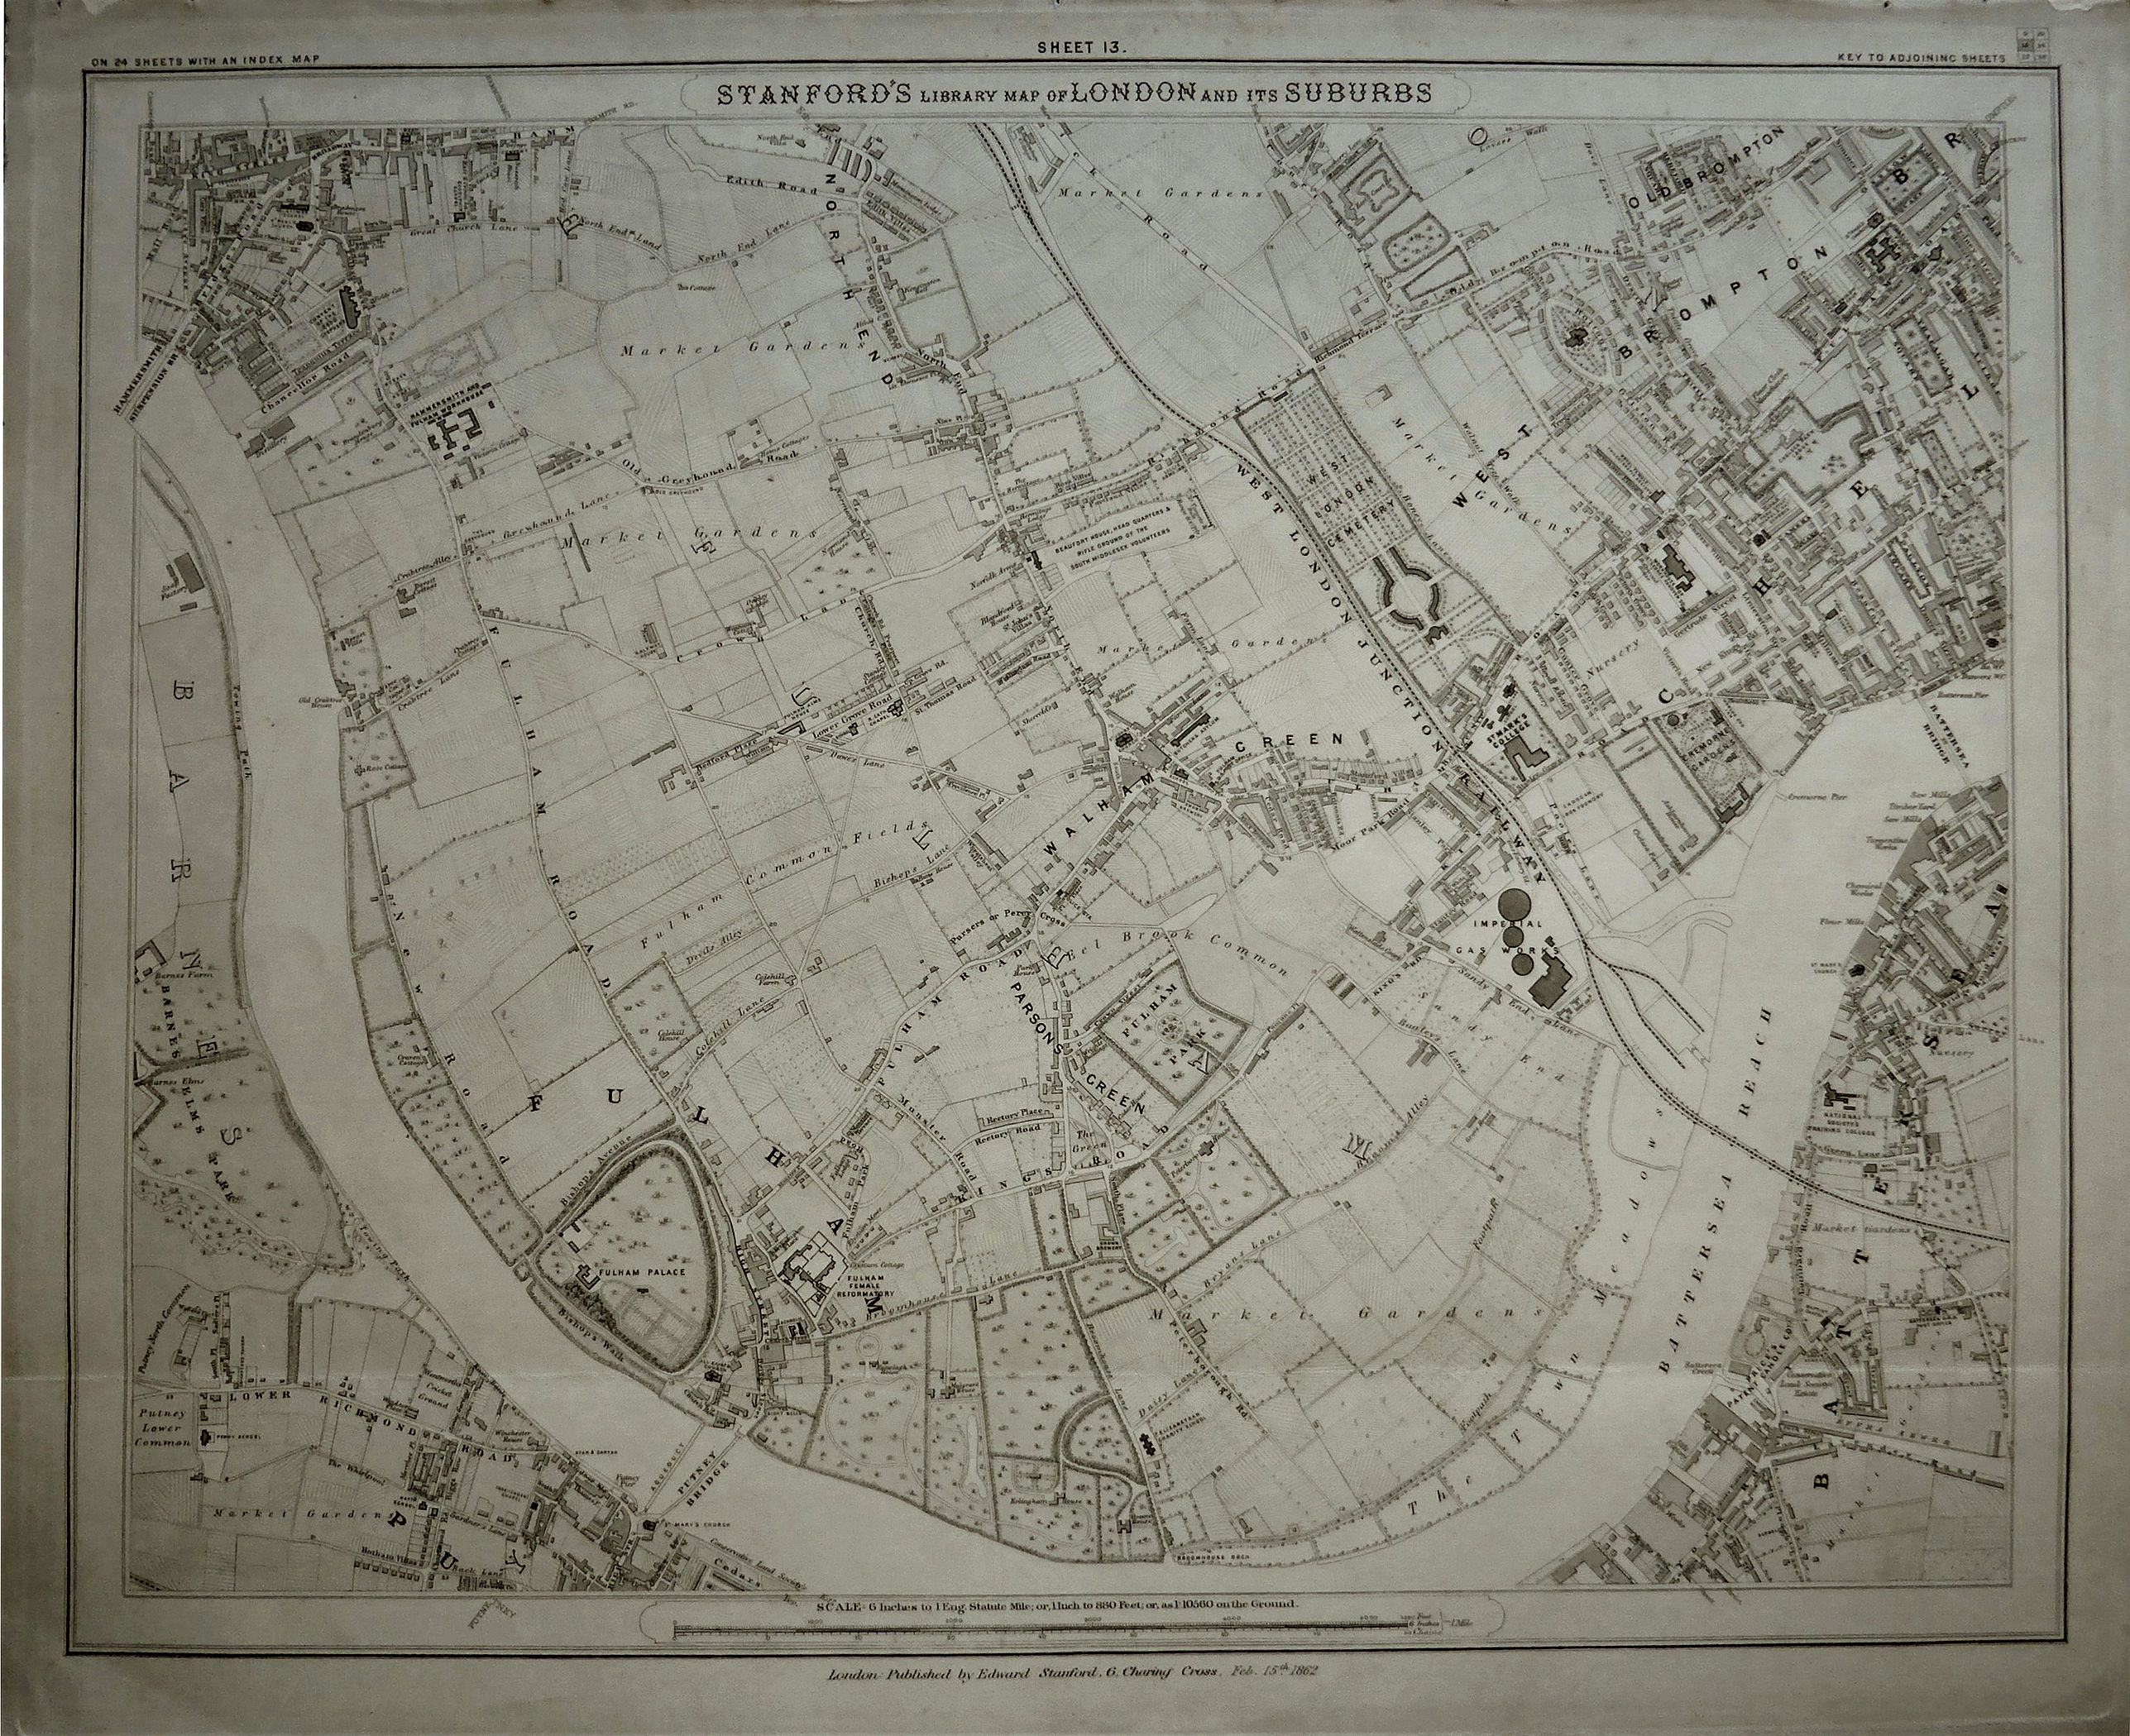 Stanford's Library Map of London and its Suburbs, sheet 13.